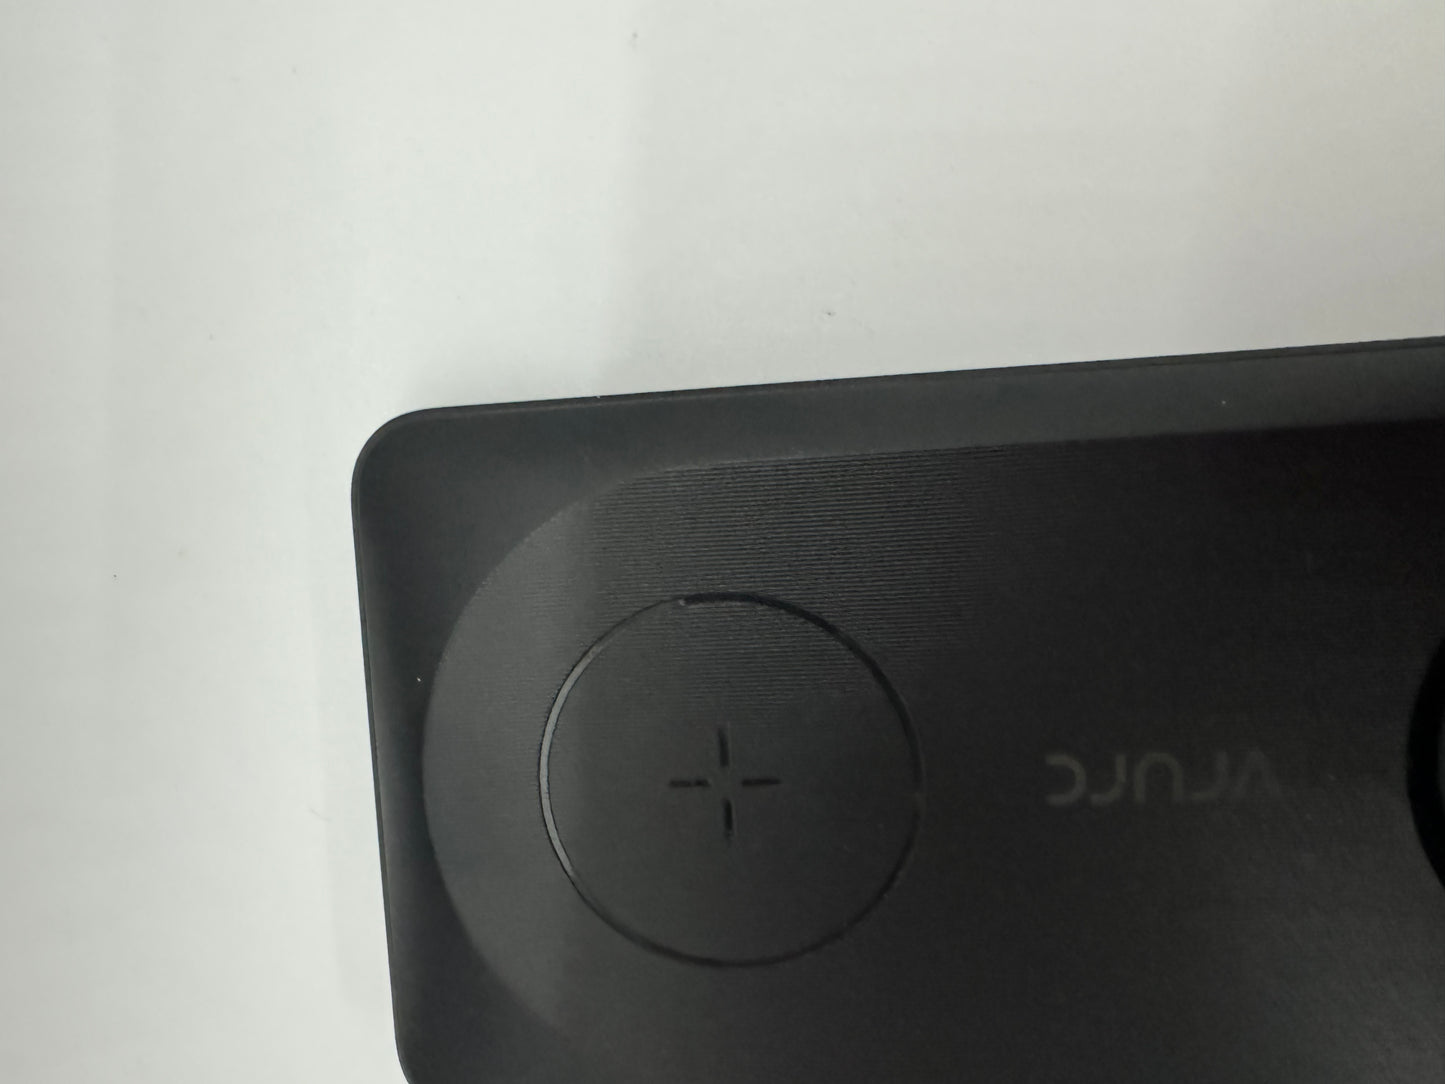 The picture shows a close-up of a dark gray or black object with a matte finish. On the object, there is a circular button with a plus sign on it. The button appears to be for volume control. The word "Anker" is embossed in the same color as the object, making it slightly difficult to see. The background is plain white. The object seems to be some kind of electronic device, possibly a speaker.